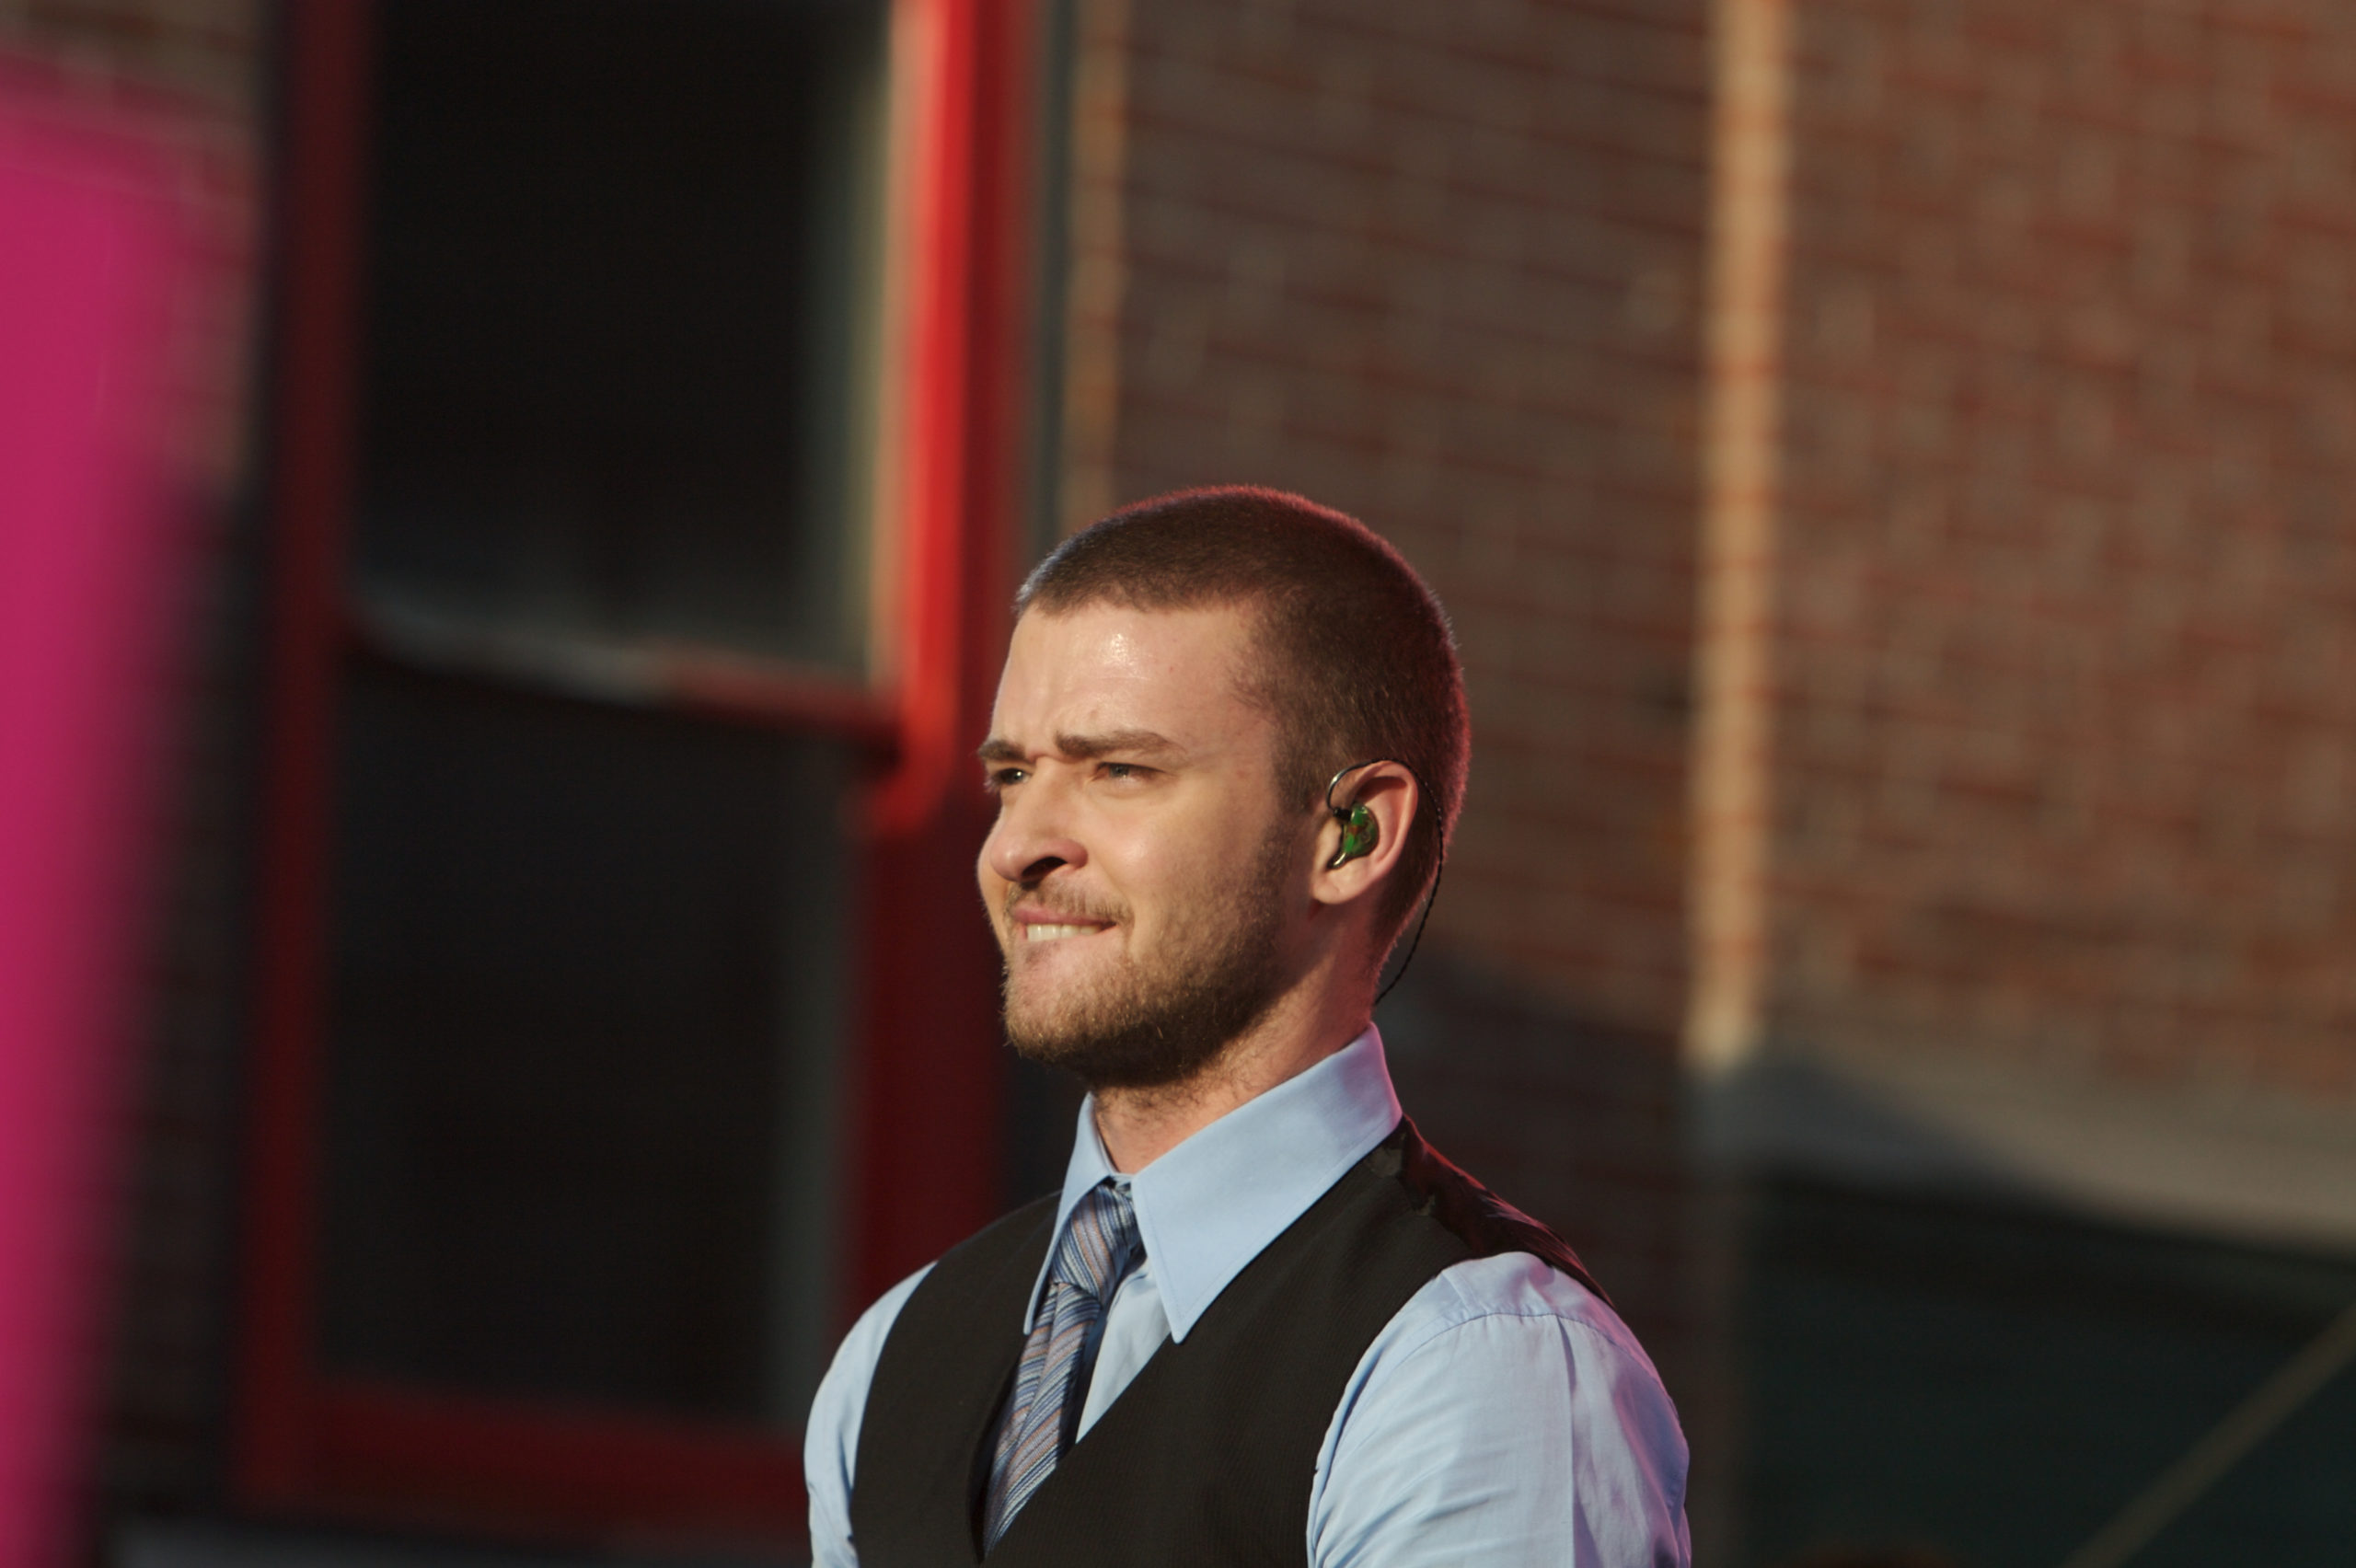 Justin TImberlake smiles as he stands in front of a brick wall.